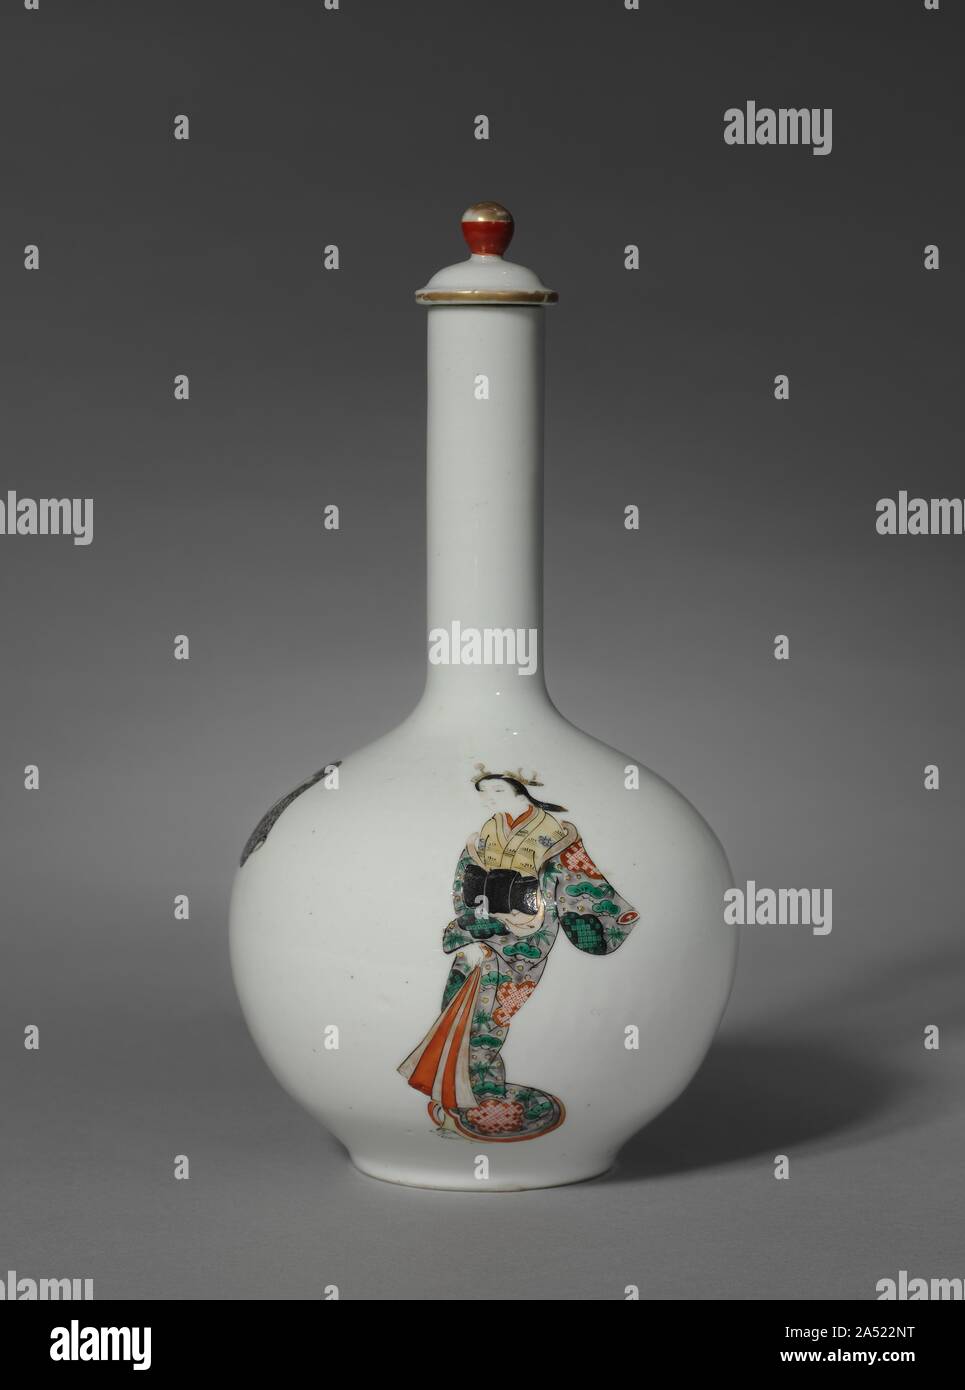 Sake Bottle with Three Figures: Arita Ware, Ko Imari Type, late 1700s. The bottle features three elegantly drawn figures: a beautiful woman, a young man, and a priest. The artist used a fine-haired brush to draw these figures in coloured enamel onto the porcelain bottle, which had already been given a clear glaze. A final firing fused the enamel to the form. The name derives from the port of Imari from where Japanese porcelains were shipped to other cities in Japan, China, and Europe. Stock Photo